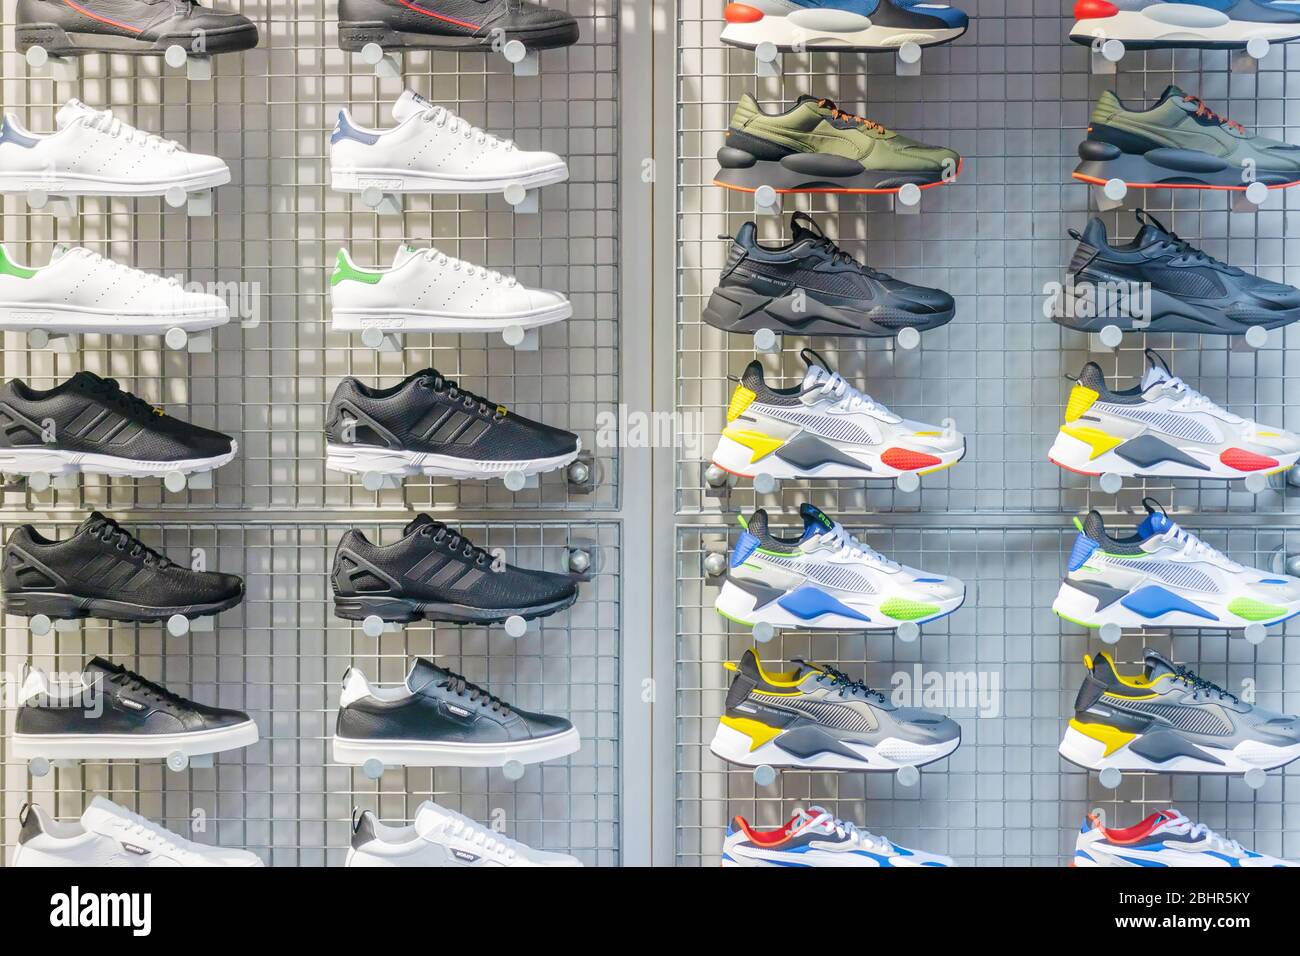 Leiden, The Netherlands - January 16, 2020: Display of different sports  shoes in a store window in Leiden, The Netherlands Stock Photo - Alamy